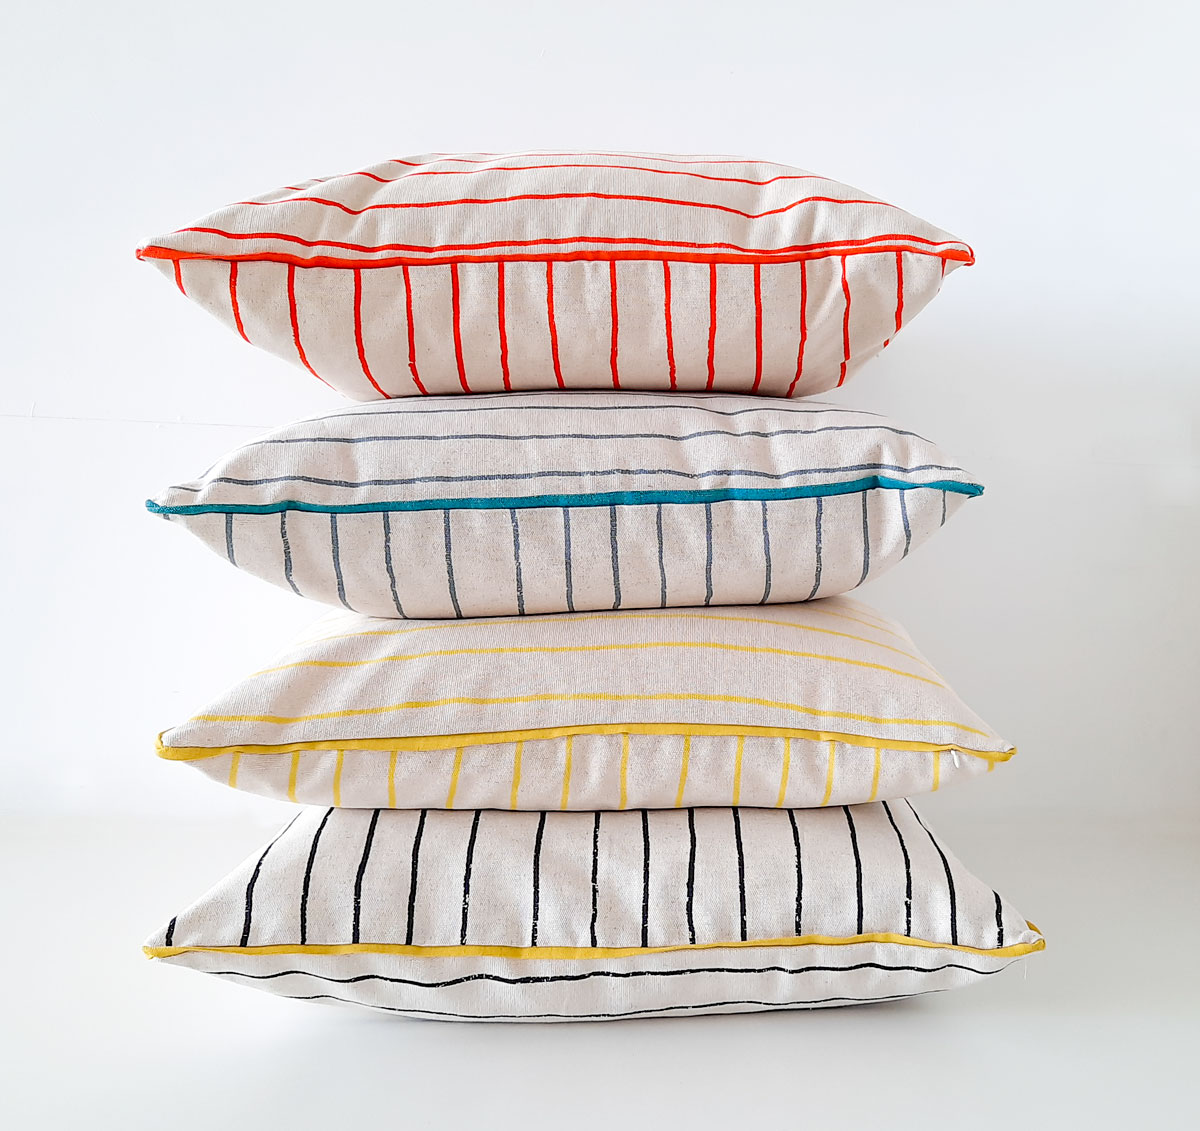 Piped scatter cushions in Simple Stripe print by Skinny laMinx